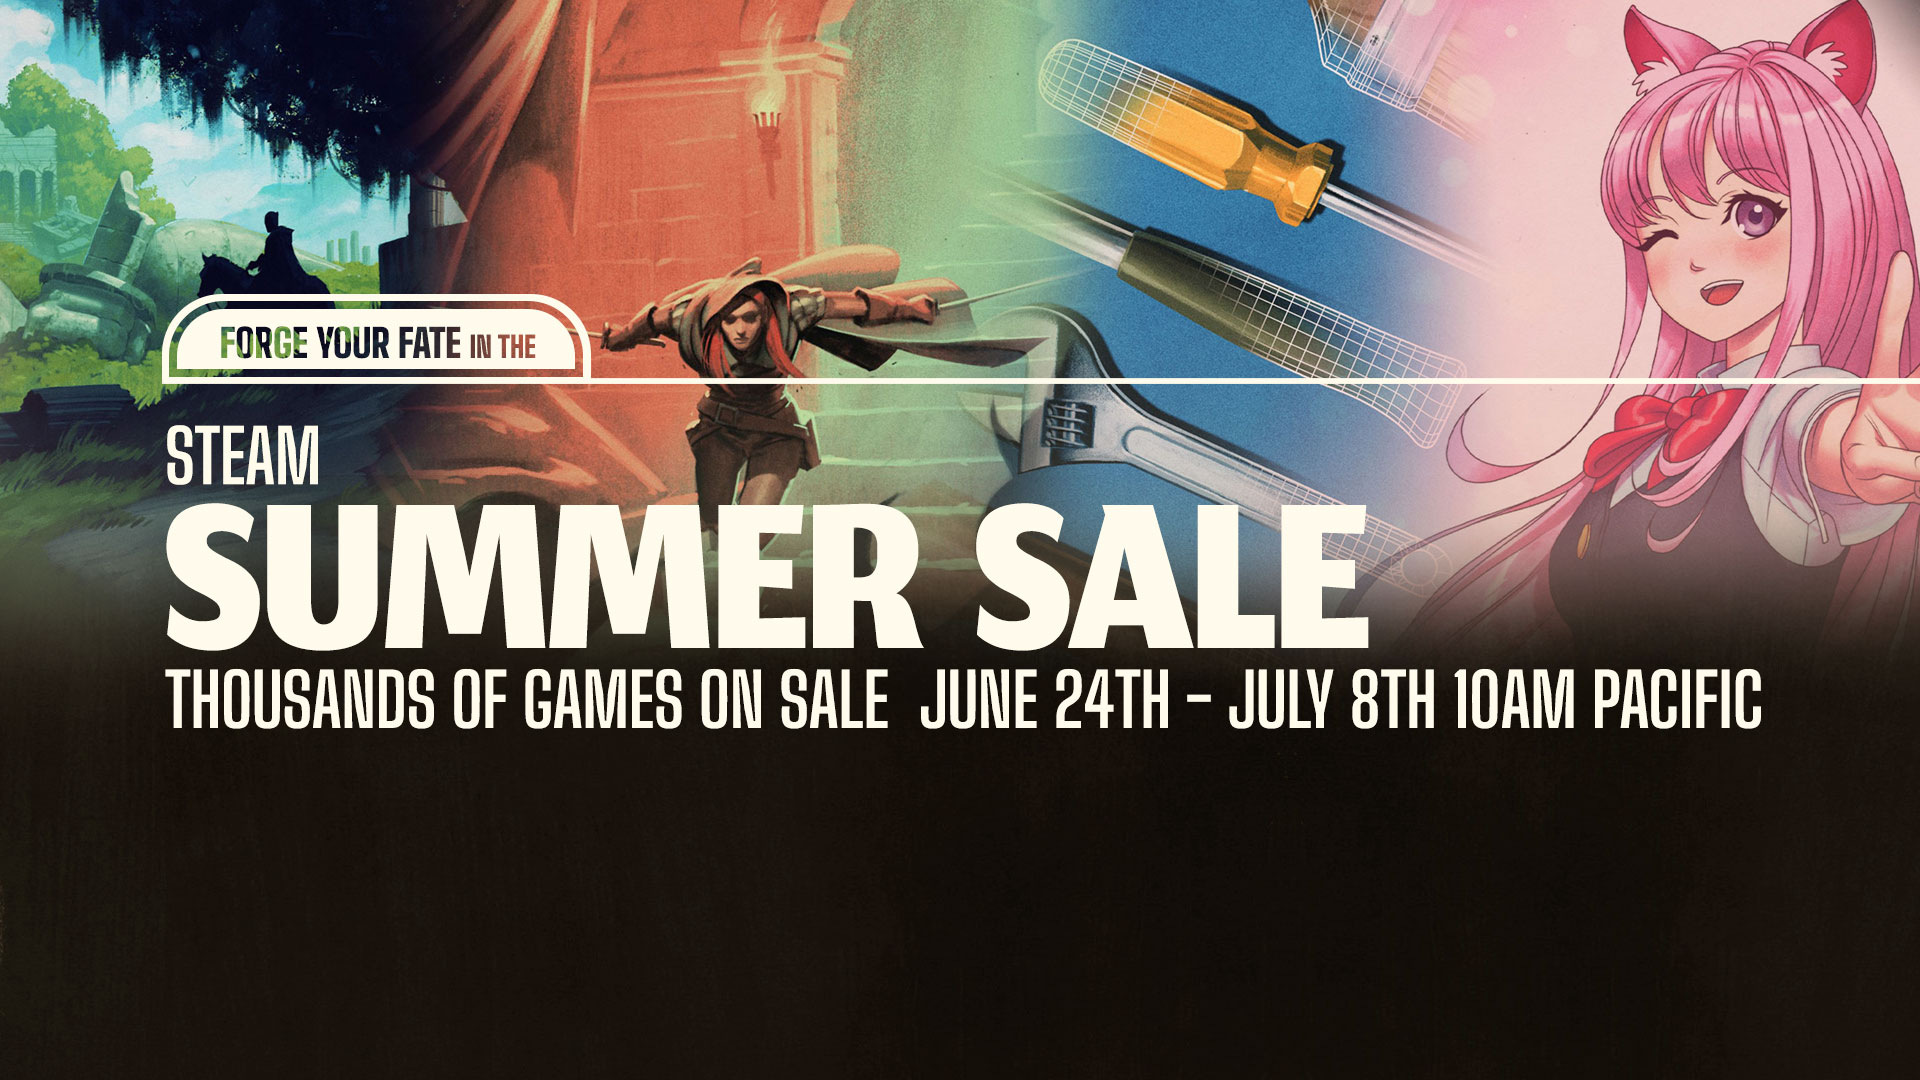 Simple Best Steam Summer Sale Game 2021 with Futuristic Setup